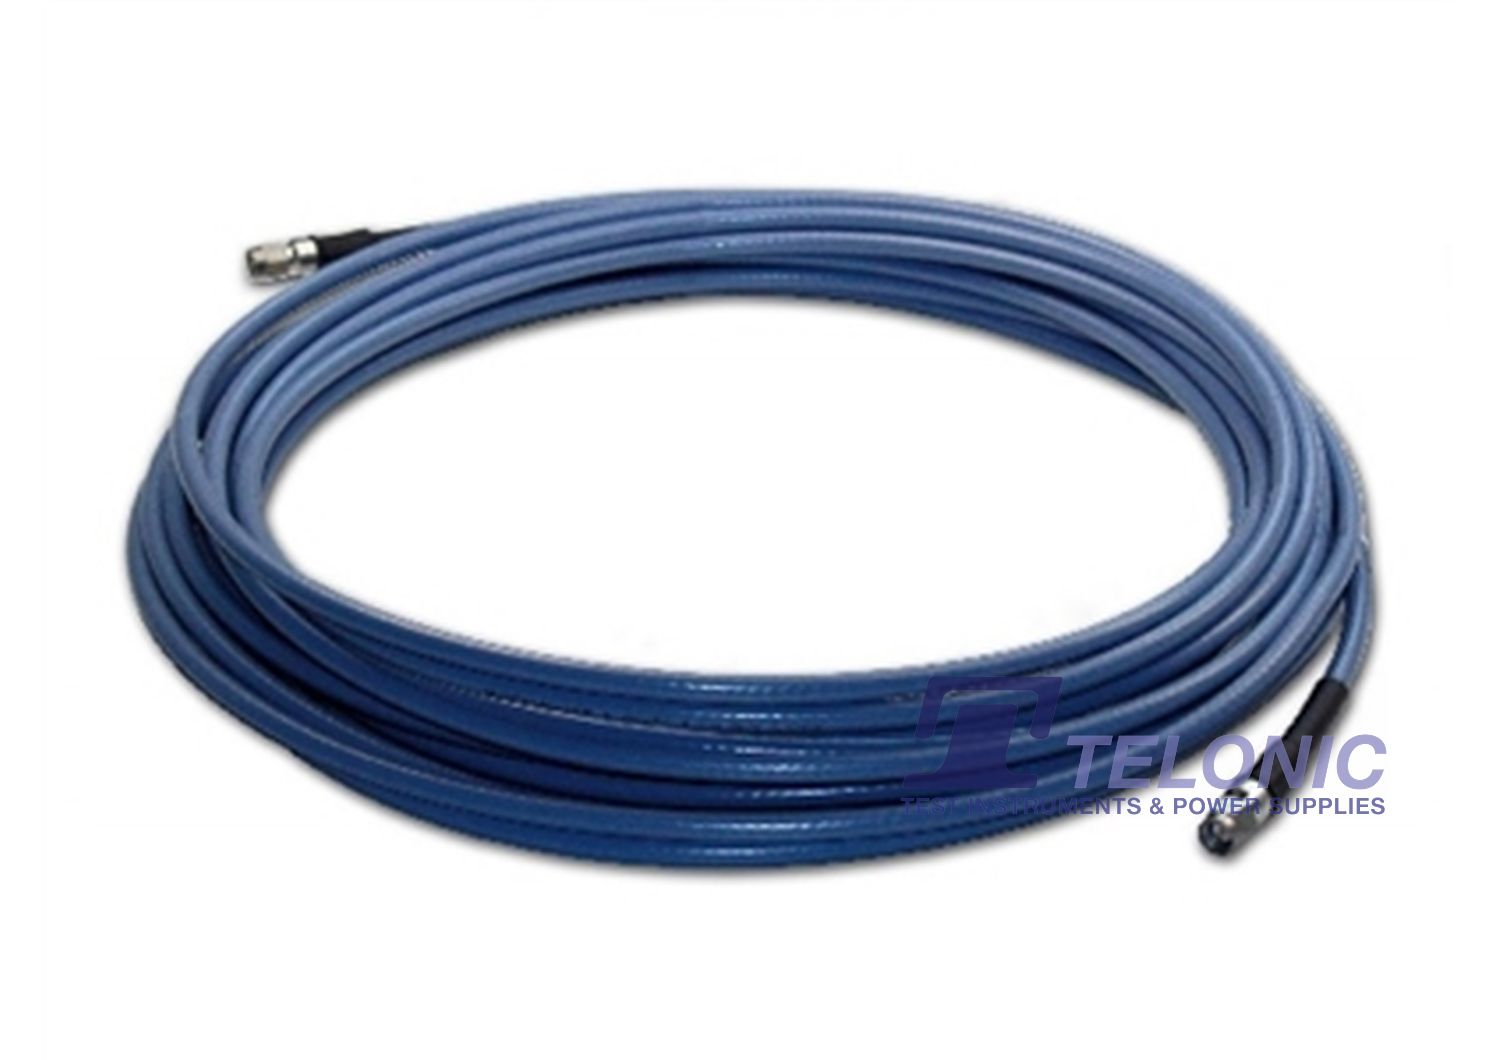 Aaronia 5m Low Loss SMA Cable